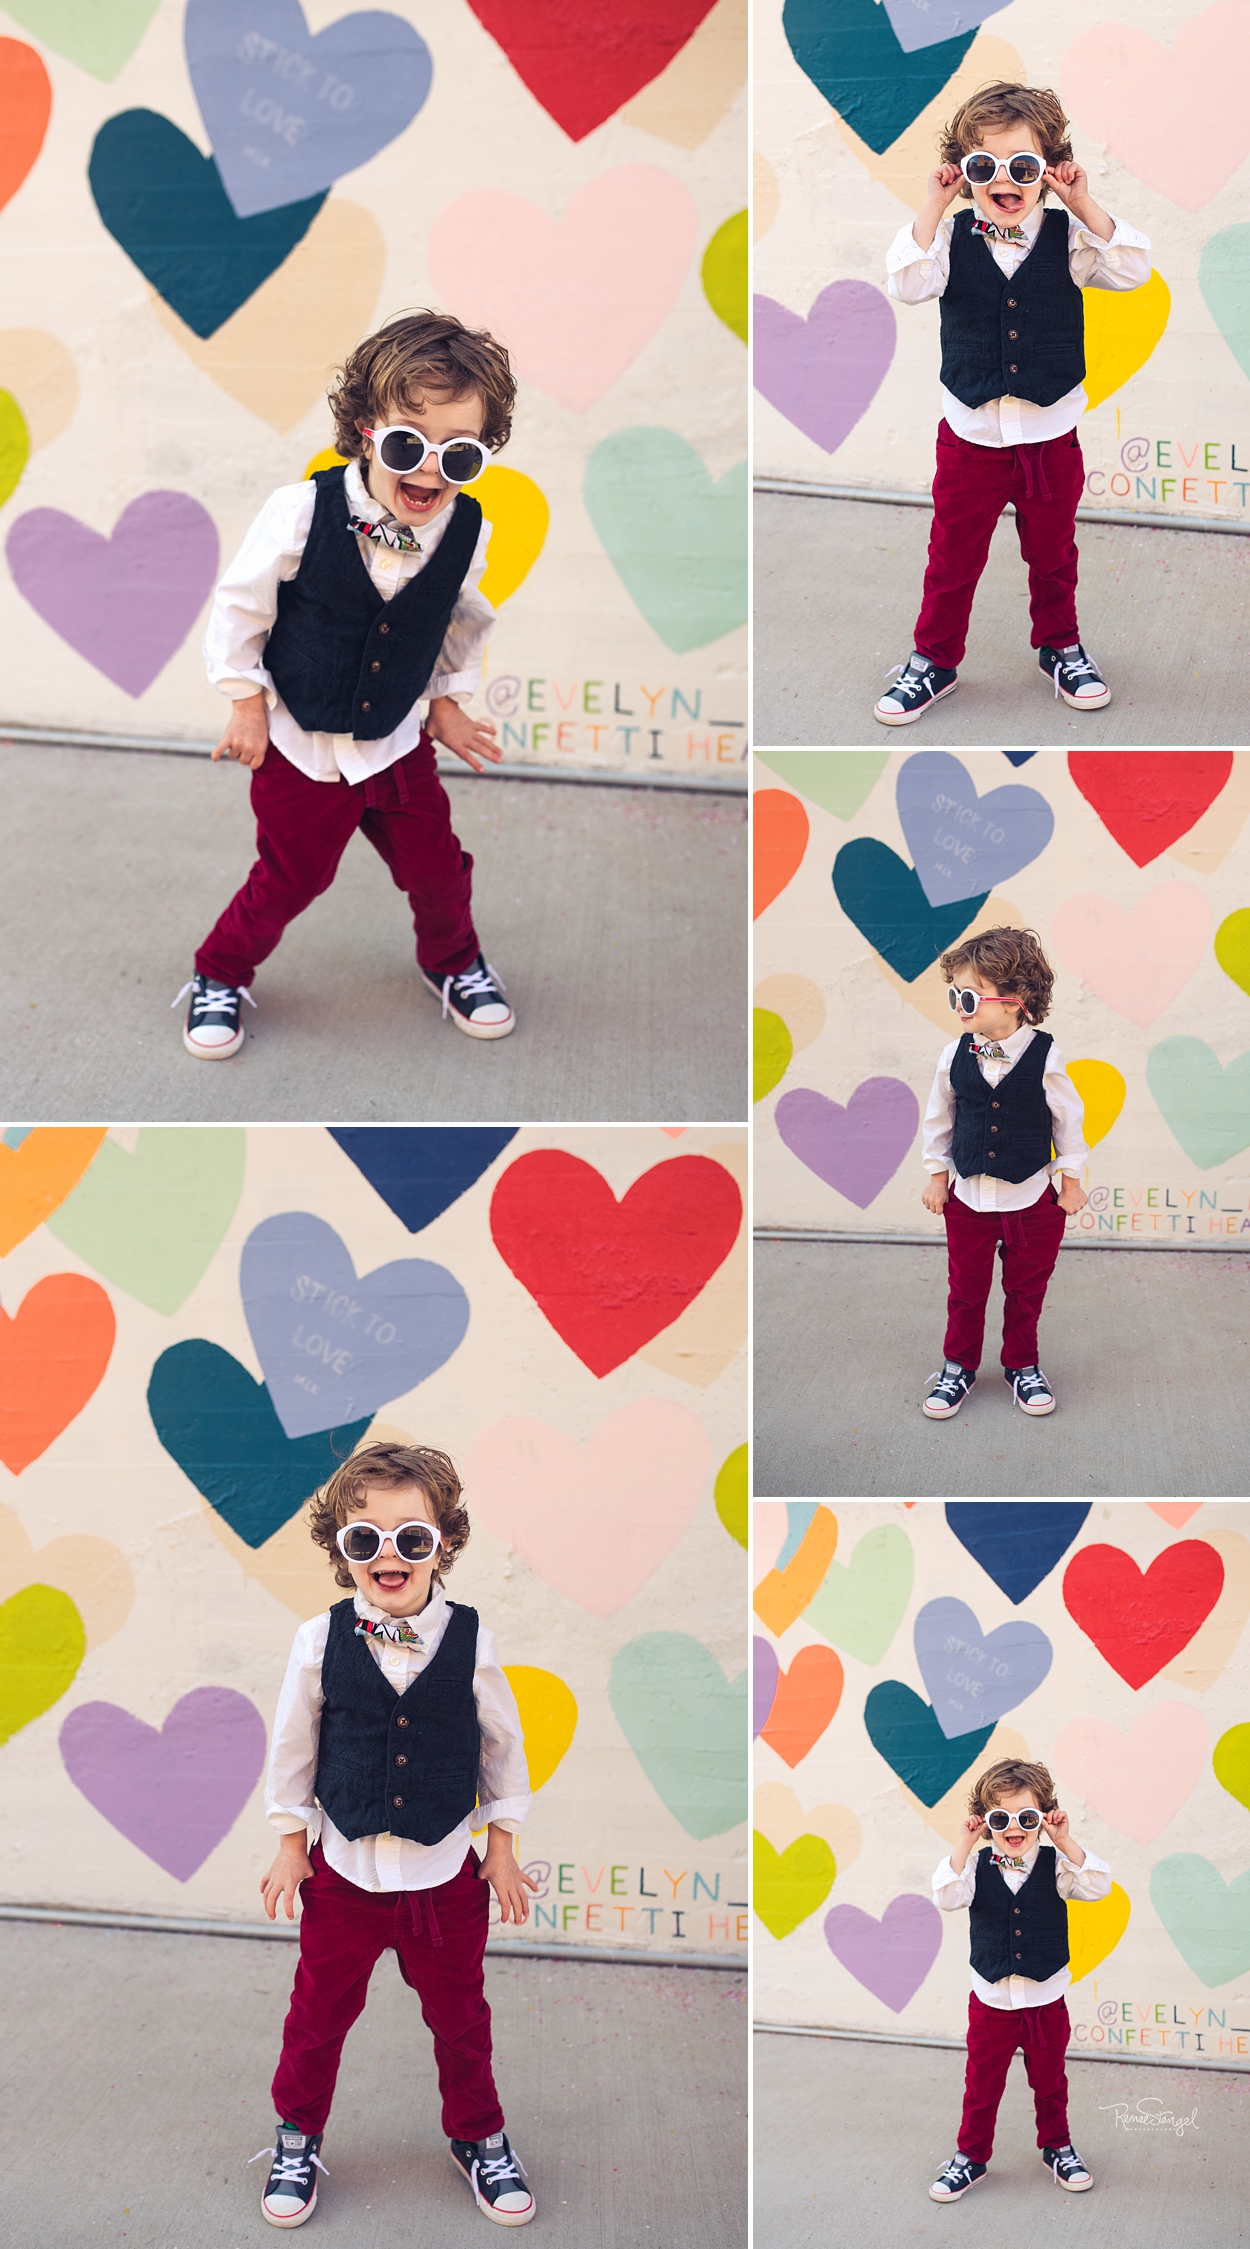 Cool Dancing Toddler in Red pants, Grey Vest and Bow Tie at Charlotte's Confetti Hearts Wall